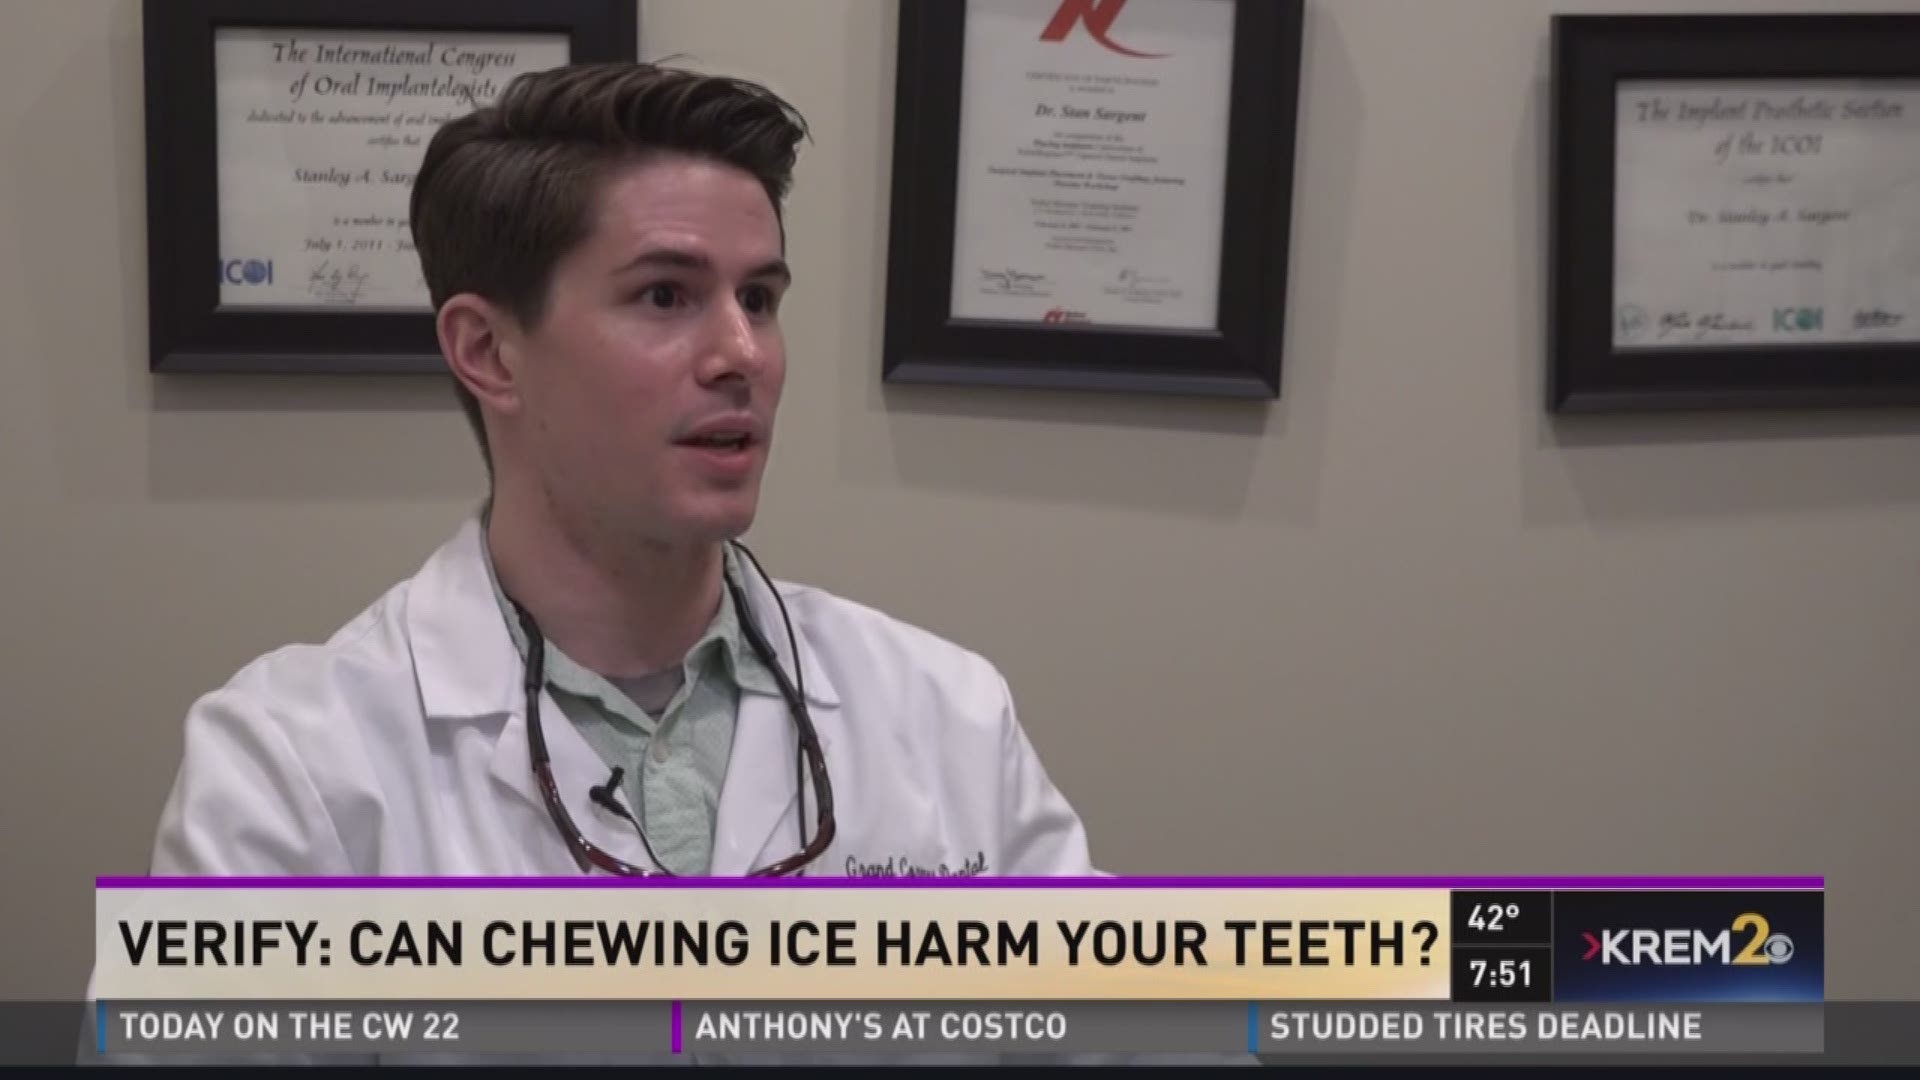 Verify: Can chewing ice harm your teeth? (3-22-18)